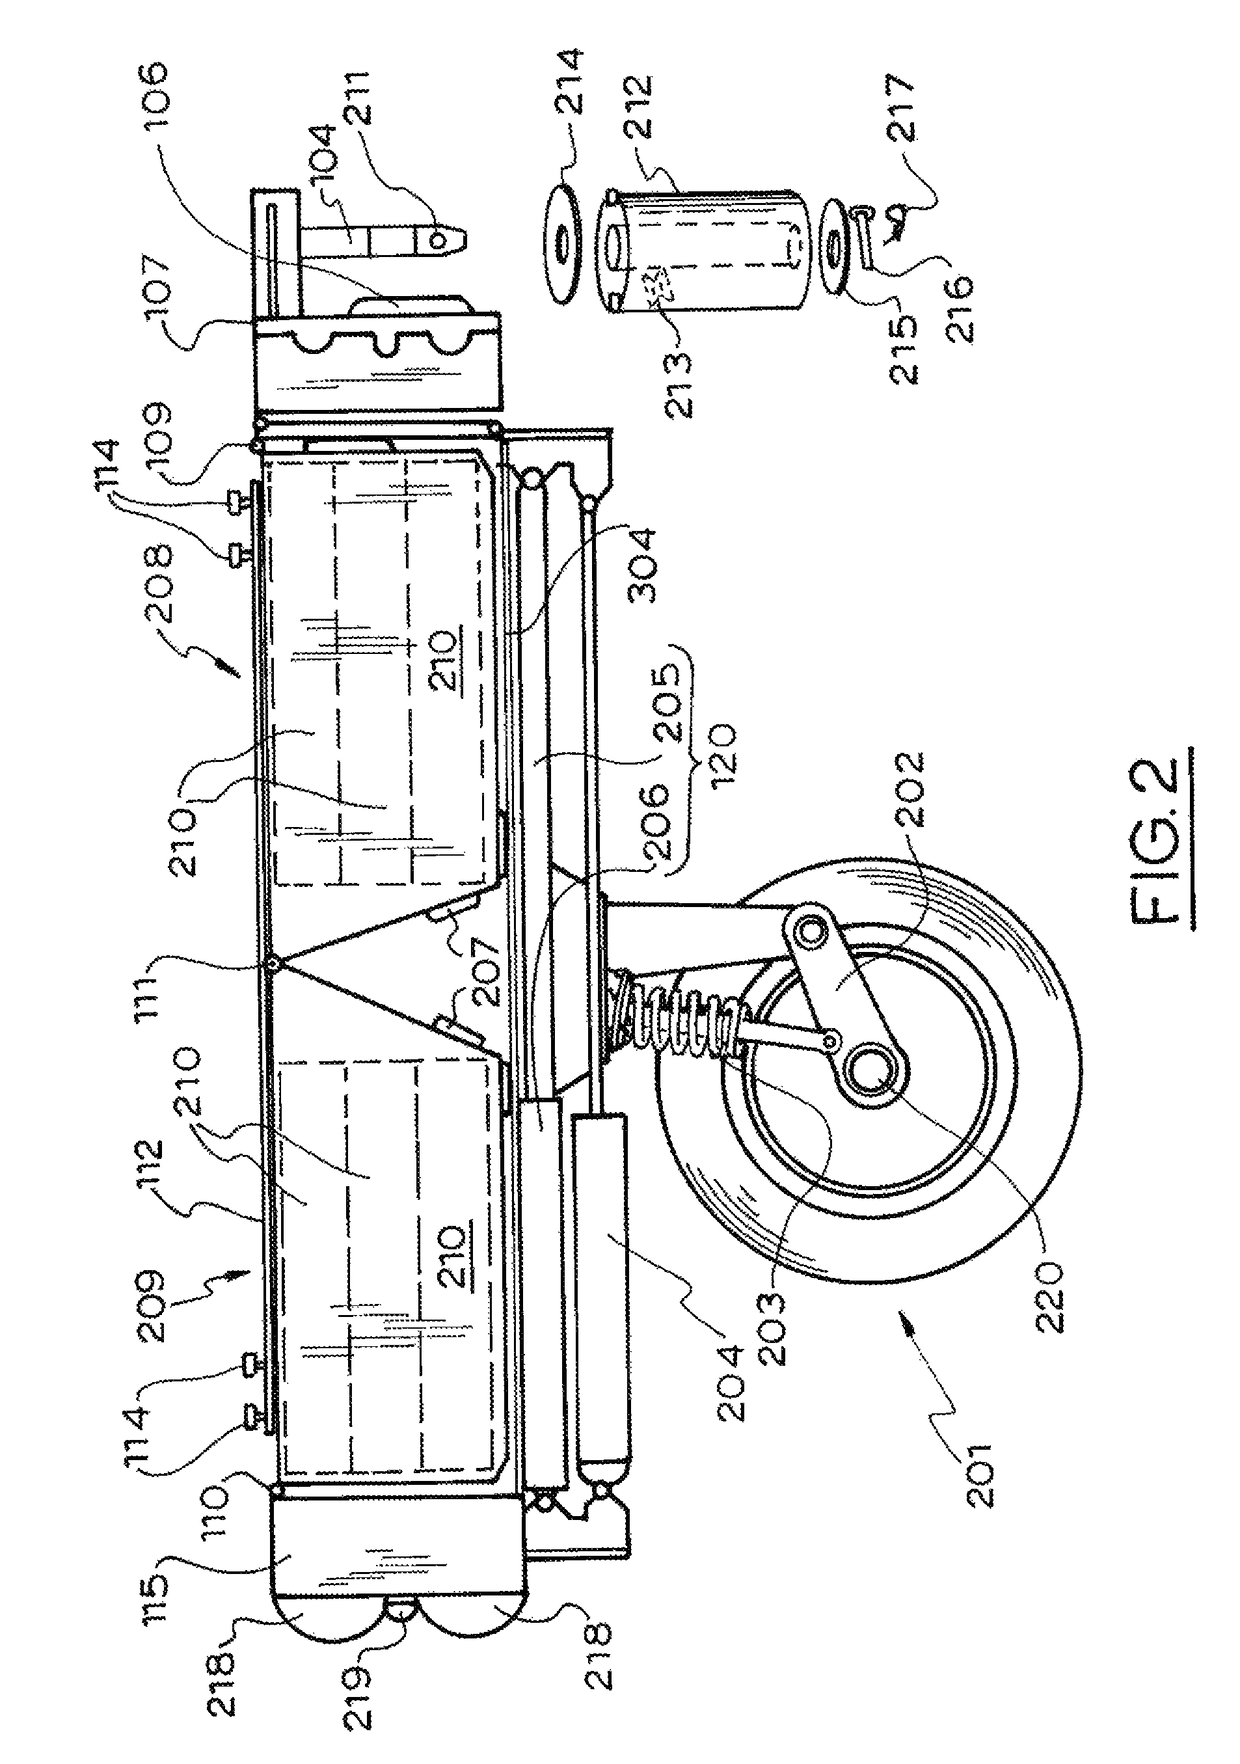 Apparatus and system for providing a secondary power source for an electric vehicle